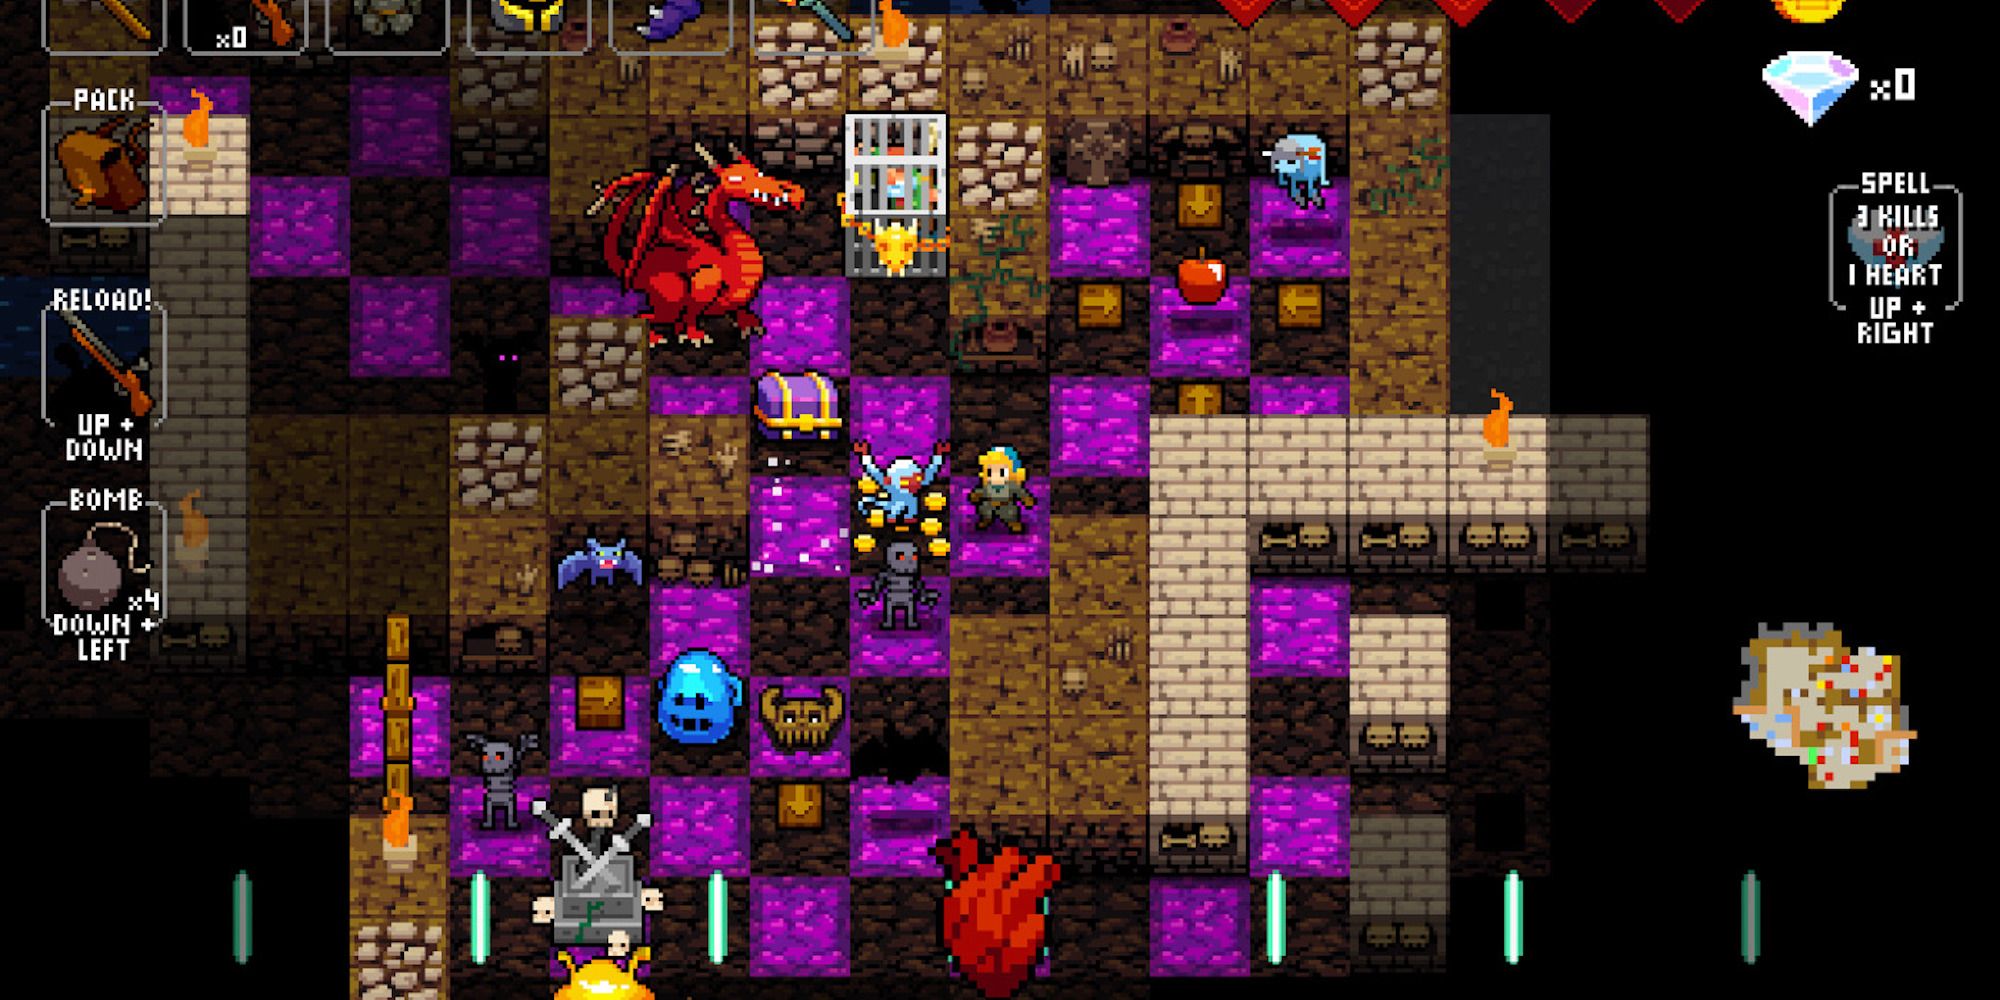 Play through a dungeon in Crypt Of The NecroDancer